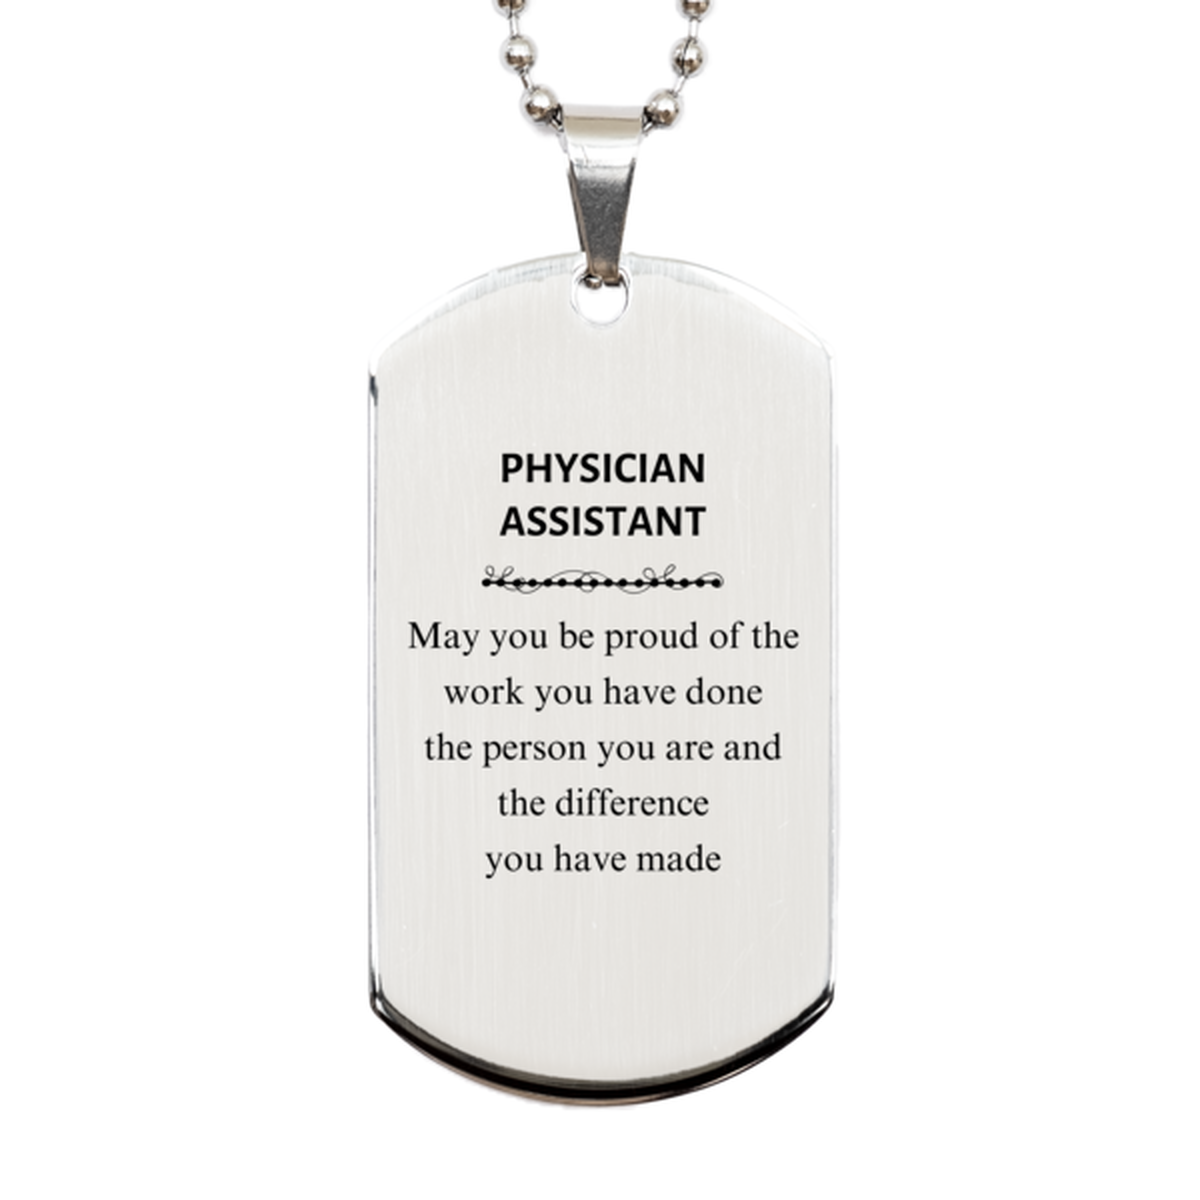 Physician Assistant May you be proud of the work you have done, Retirement Physician Assistant Silver Dog Tag for Colleague Appreciation Gifts Amazing for Physician Assistant